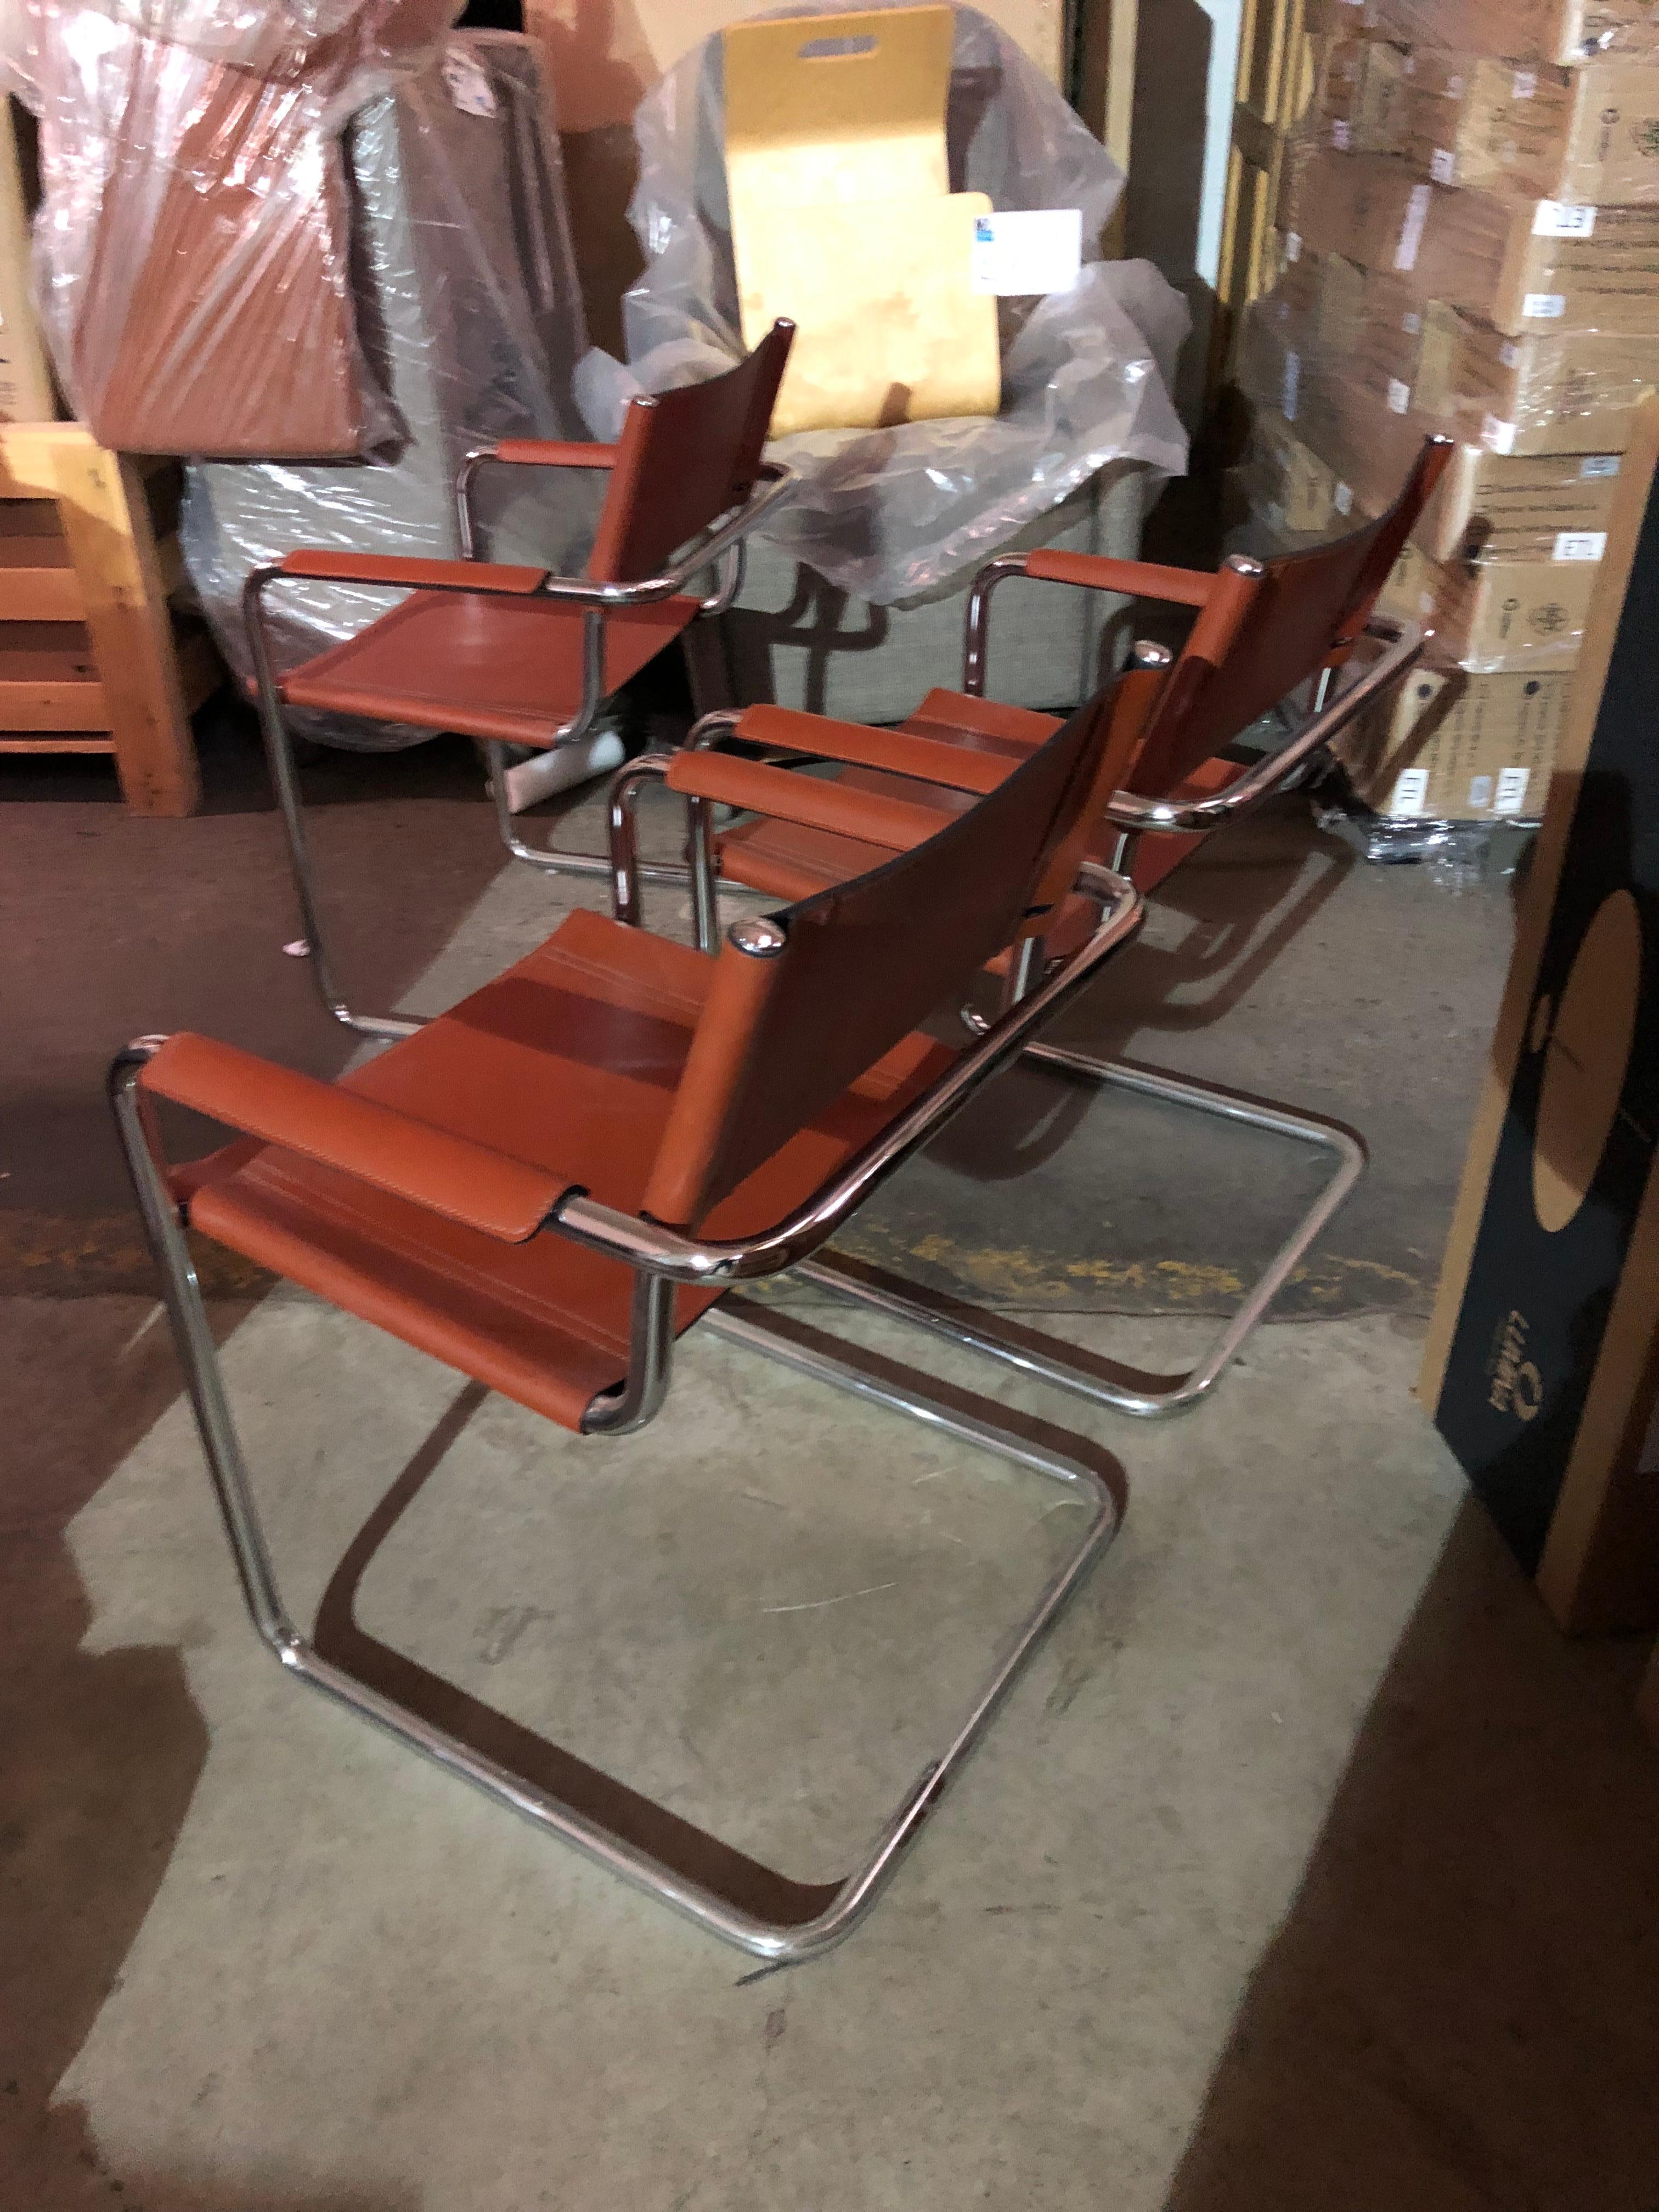 #MG5/B MG chair (3) available
Coach leather: Rust color
Steel frame: Polished chrome
Measures: 24